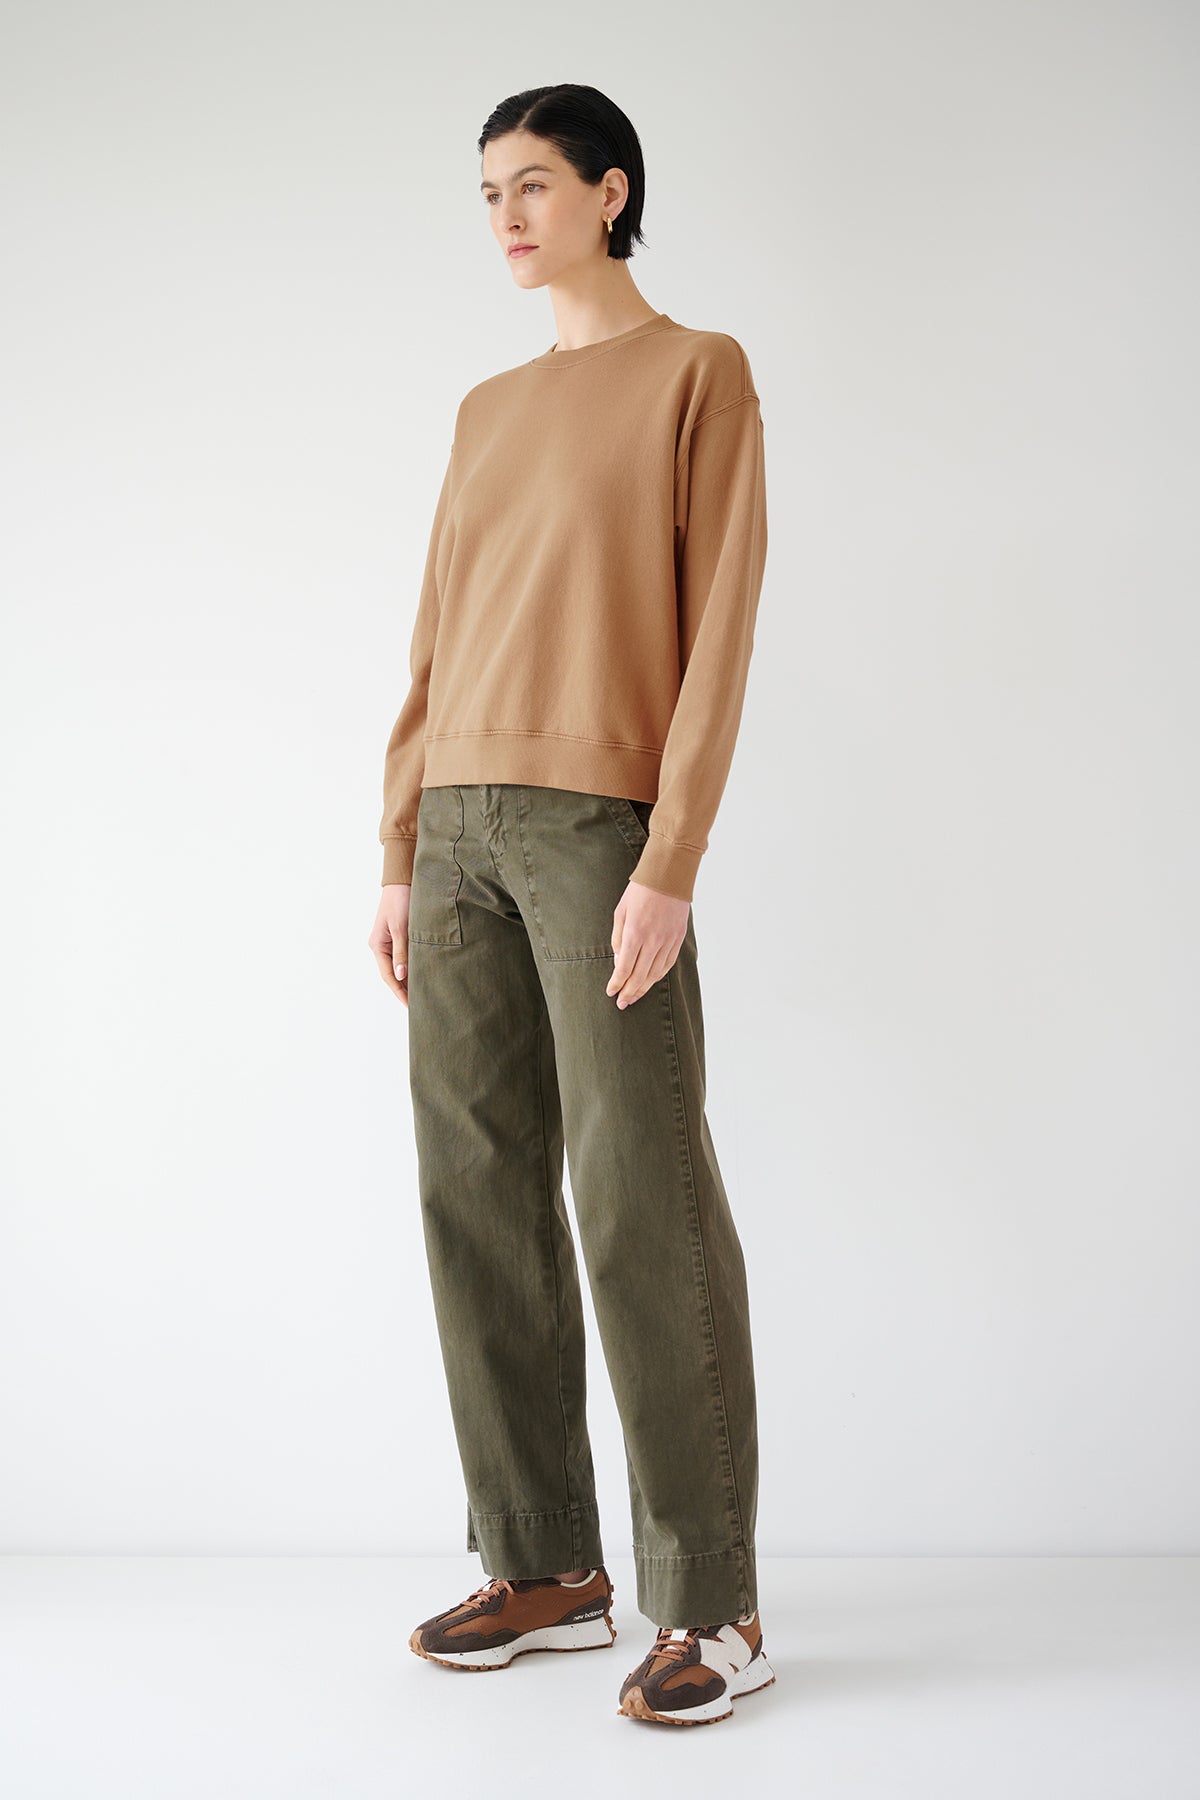   The model is wearing a YNEZ SWEATSHIRT by Velvet by Jenny Graham and brown pants. 